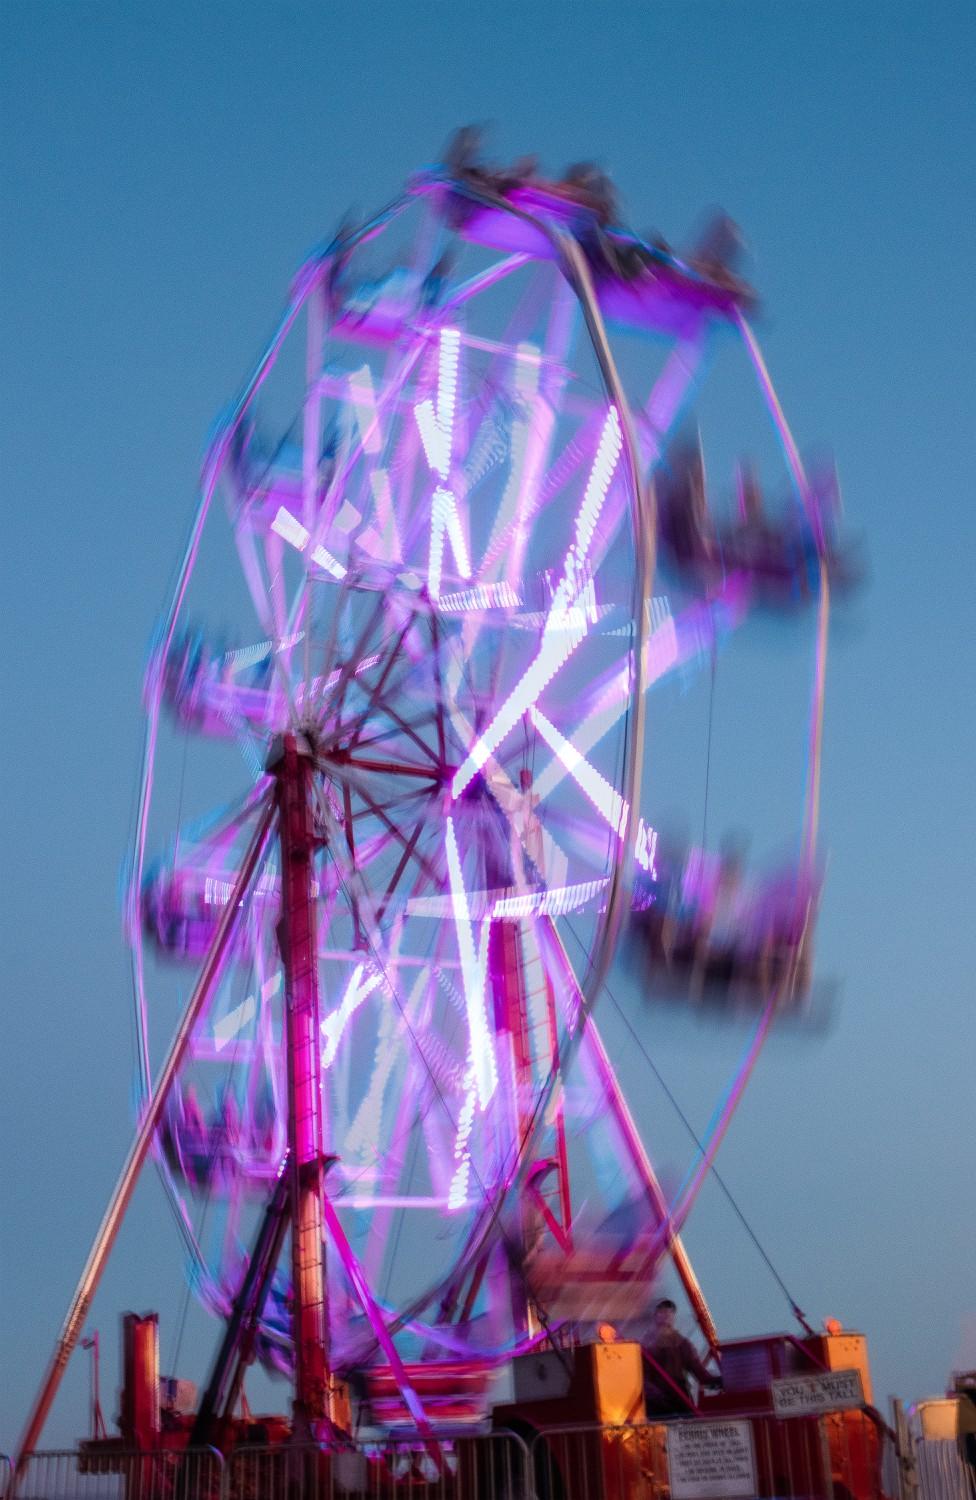 The Ferris wheel spins on Alumni Park for PSMA on March 25. Students said they enjoyed music, food and art during the festival. Photo by Sammie Wuensche